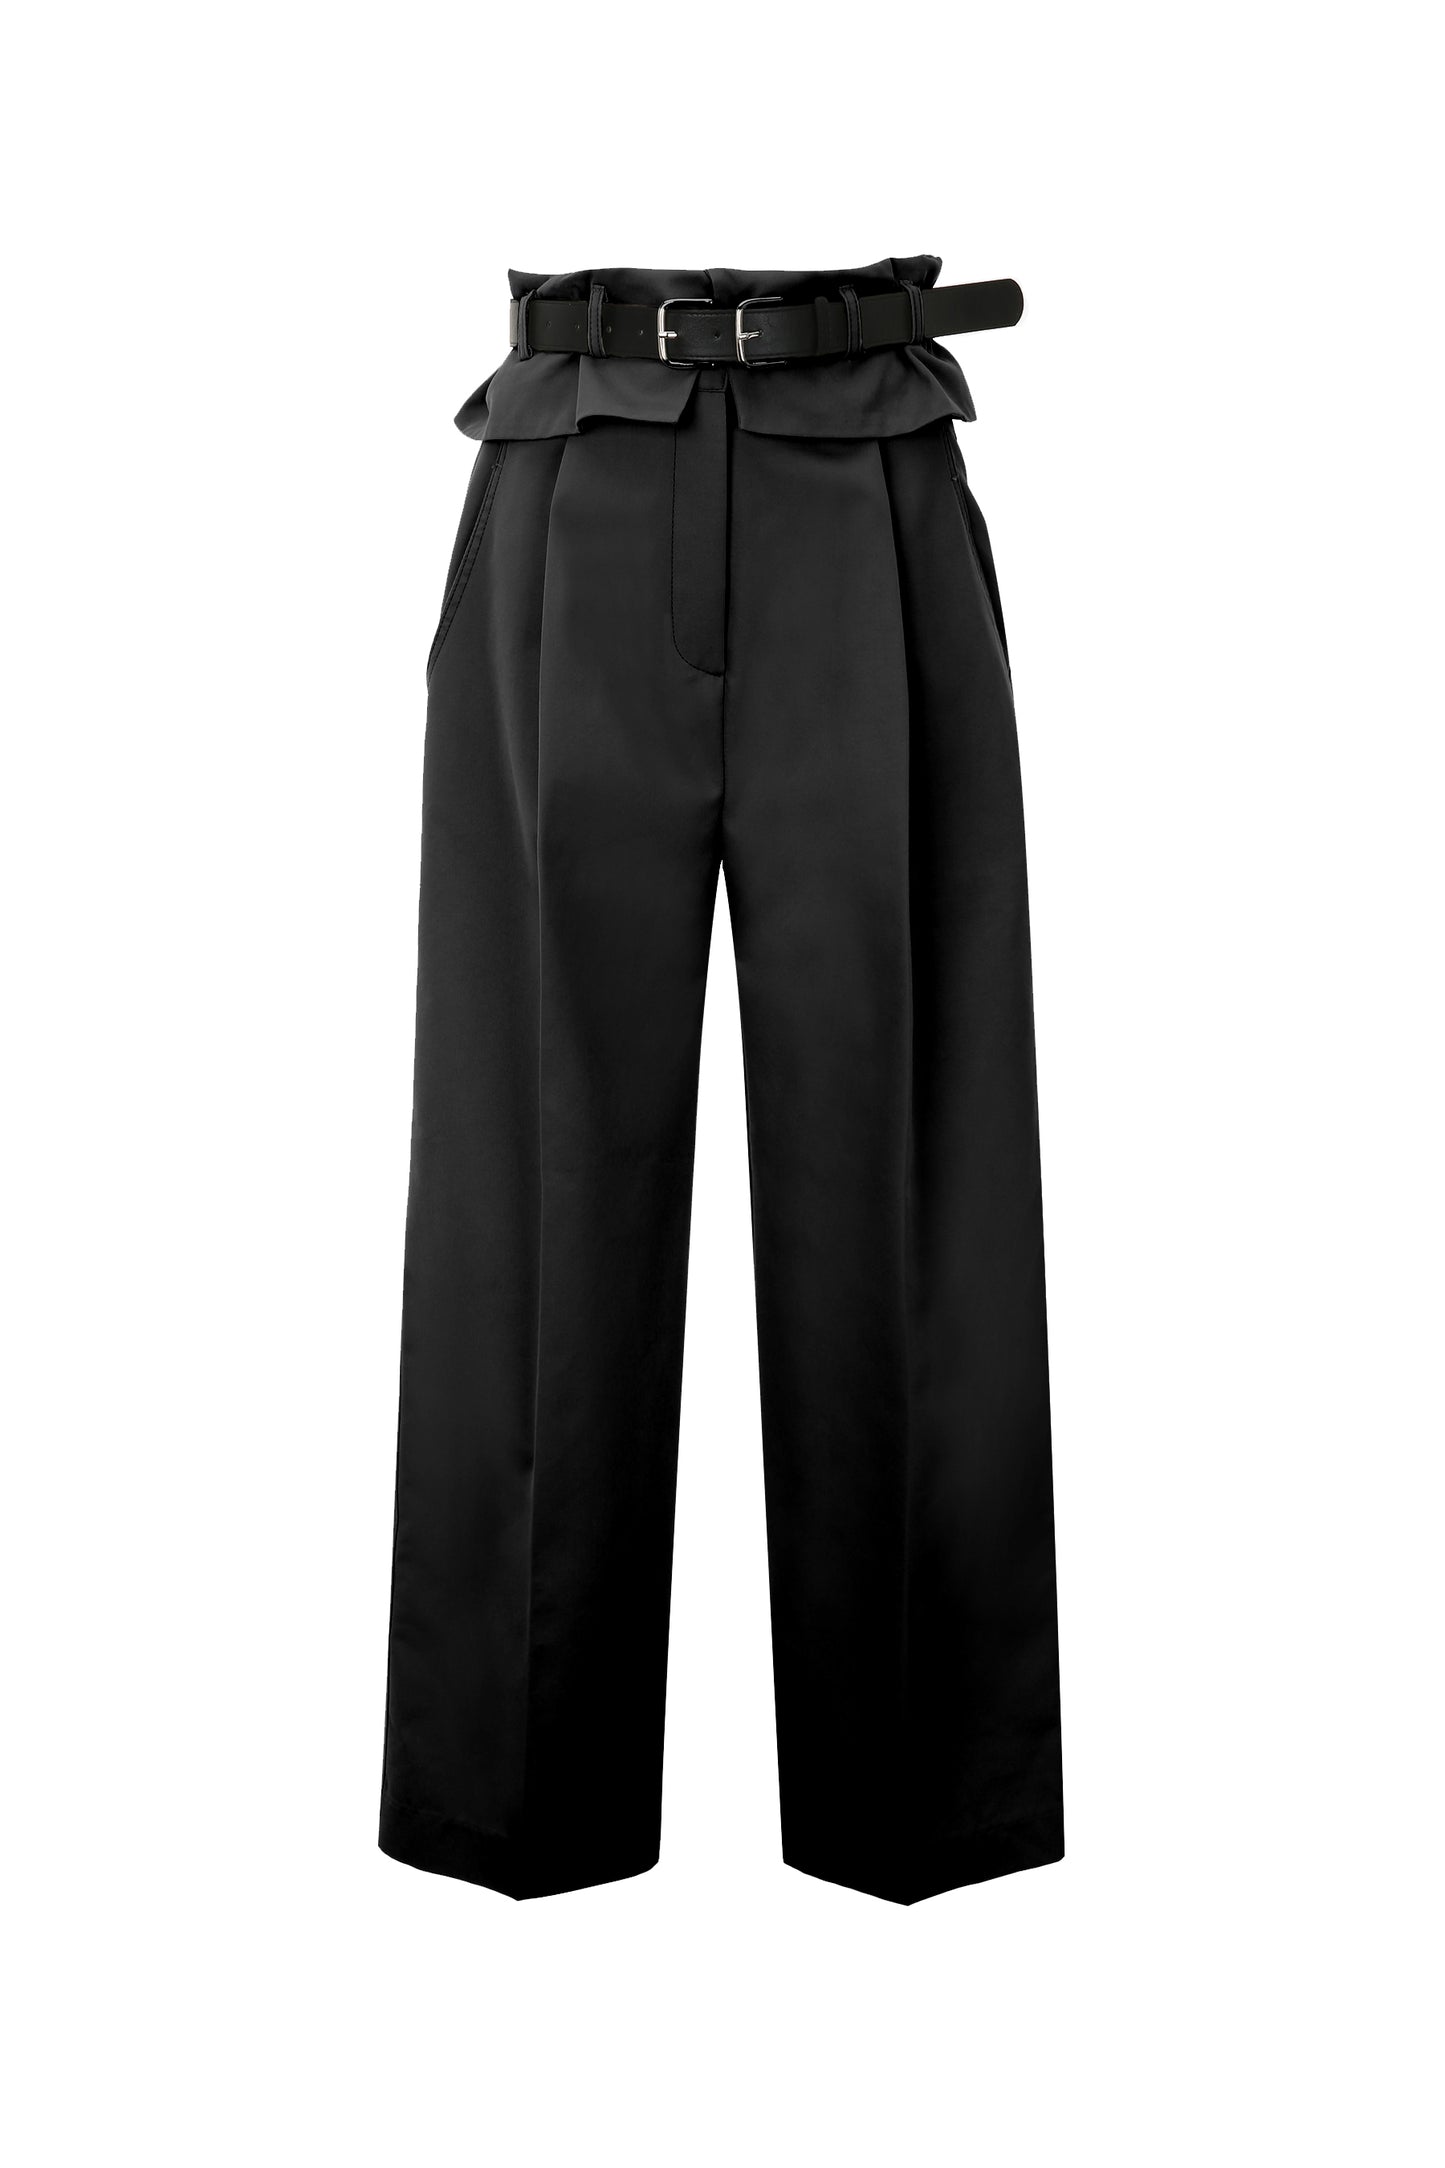 Foldover Double-Belted Pants, Black